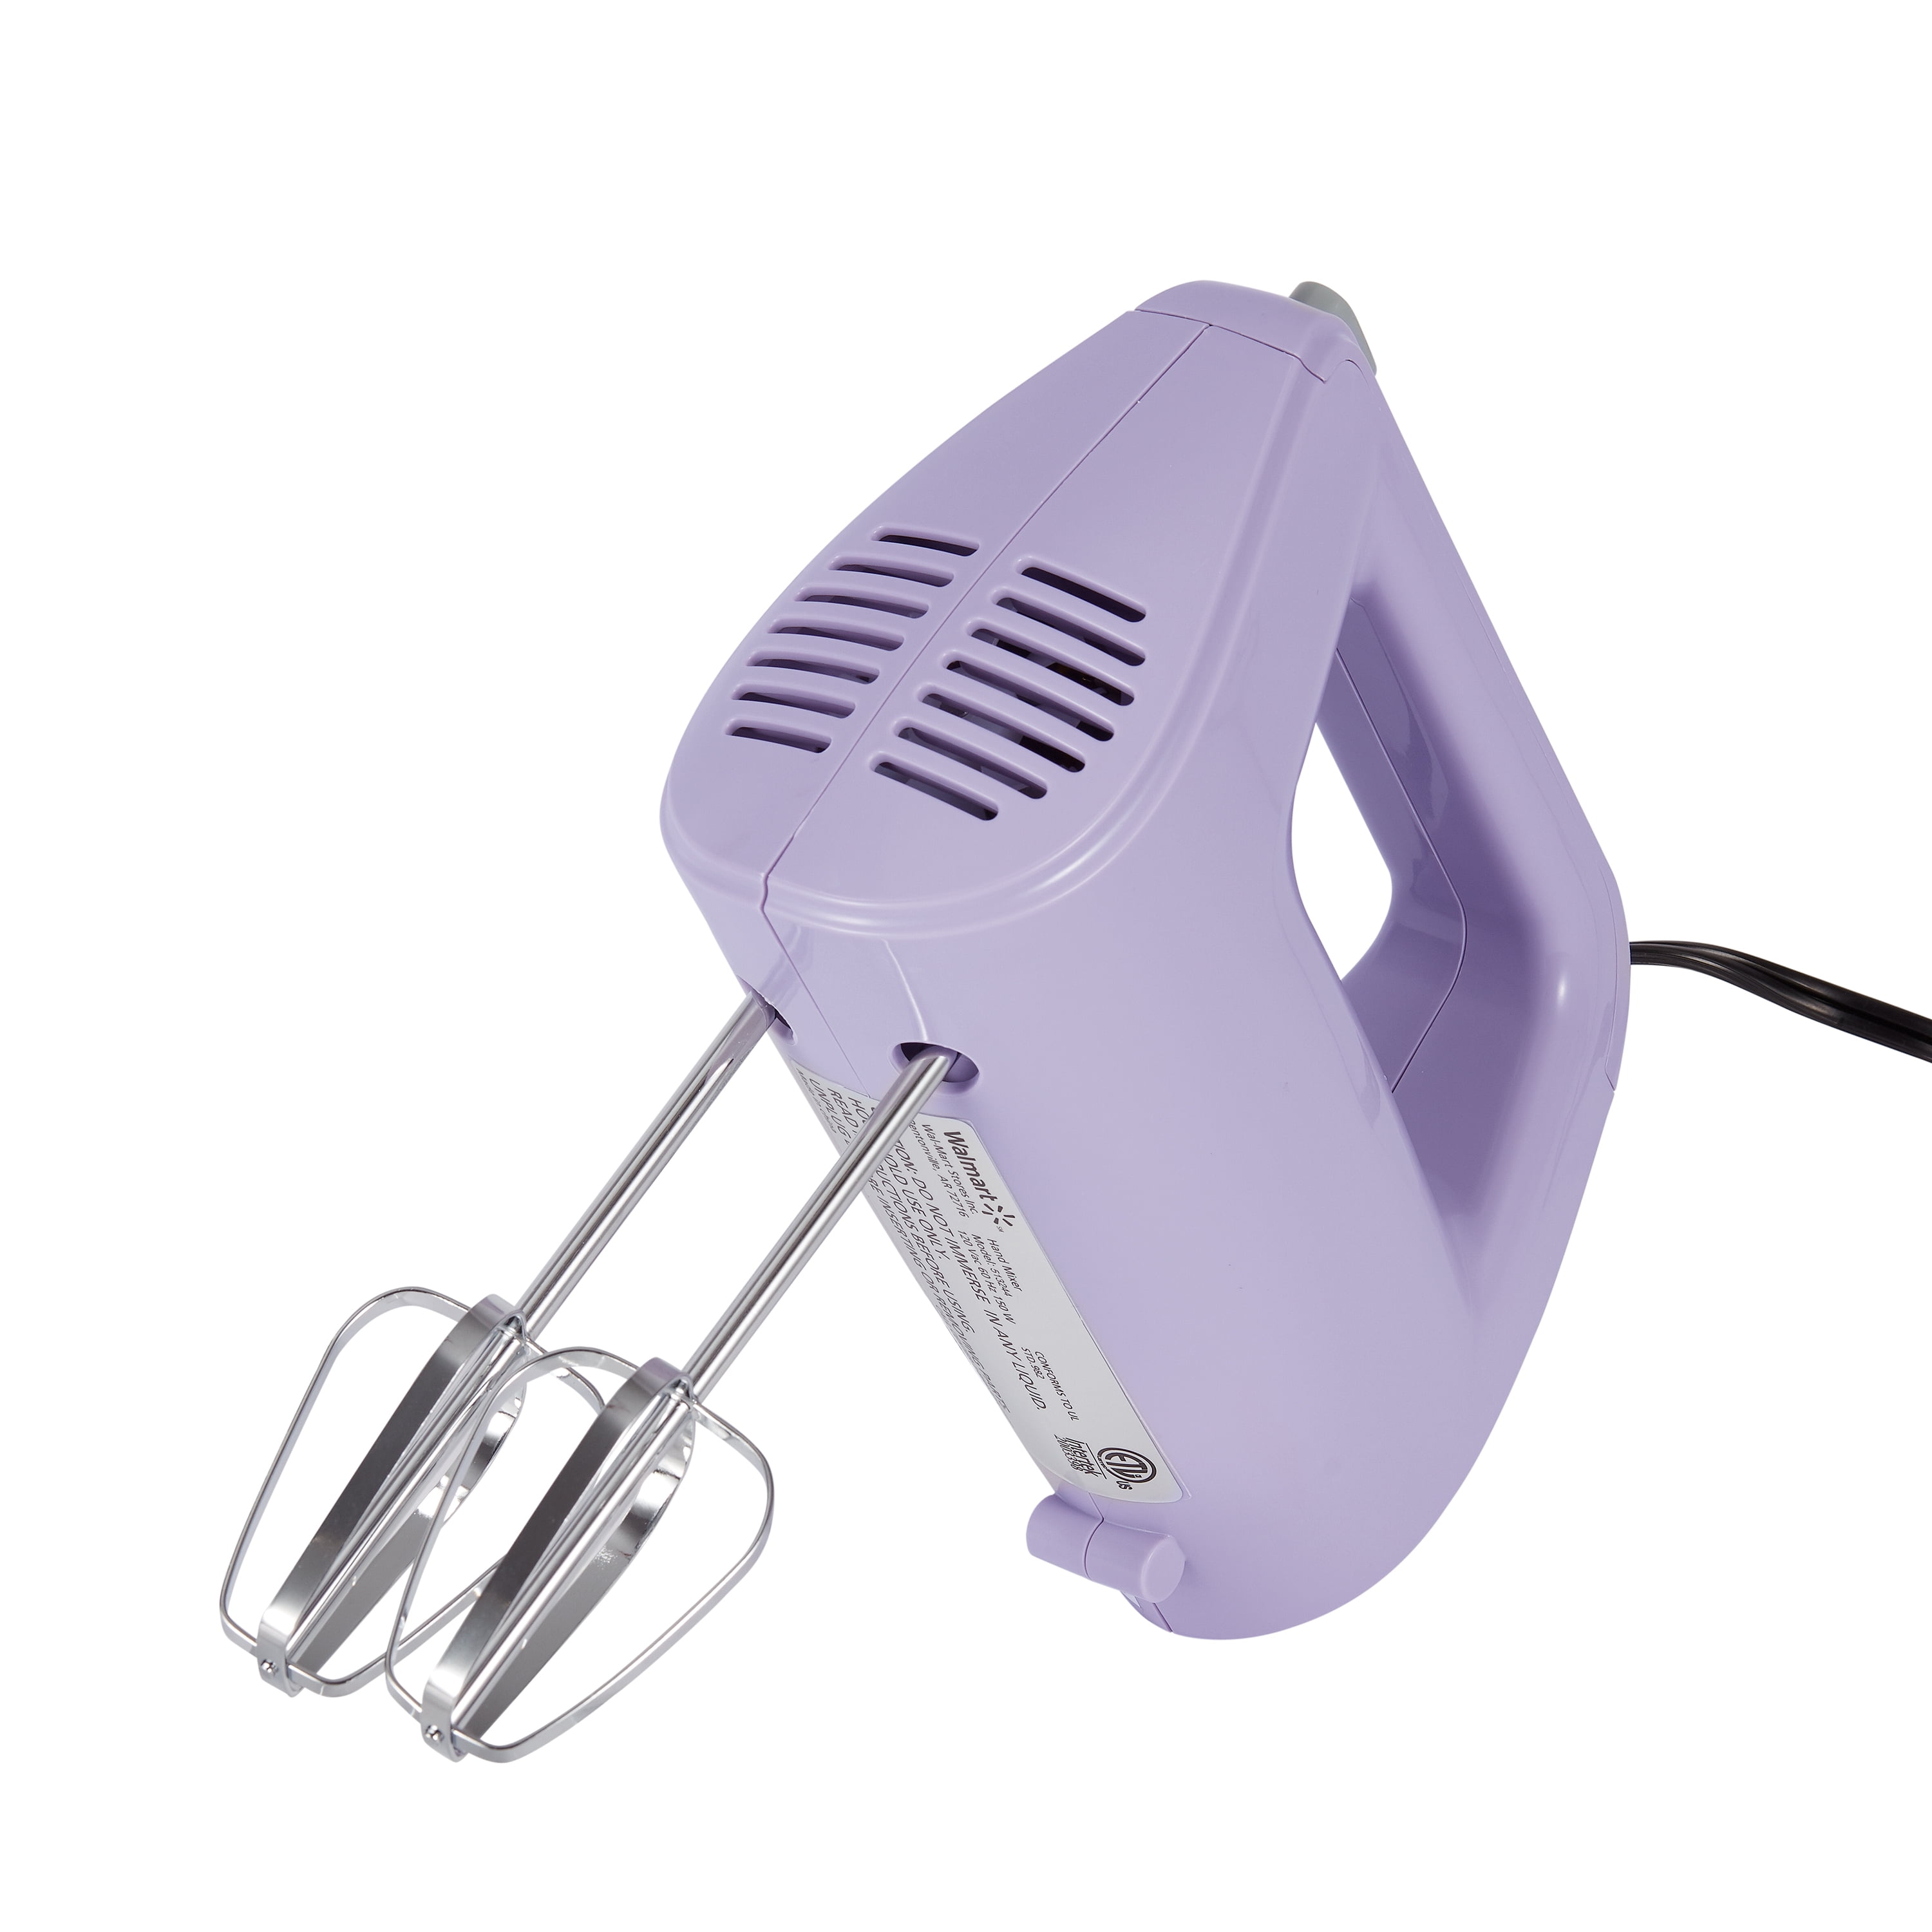 Mainstays 5-Speed 150-Watts Hand Mixer with Chrome Beaters, Mint